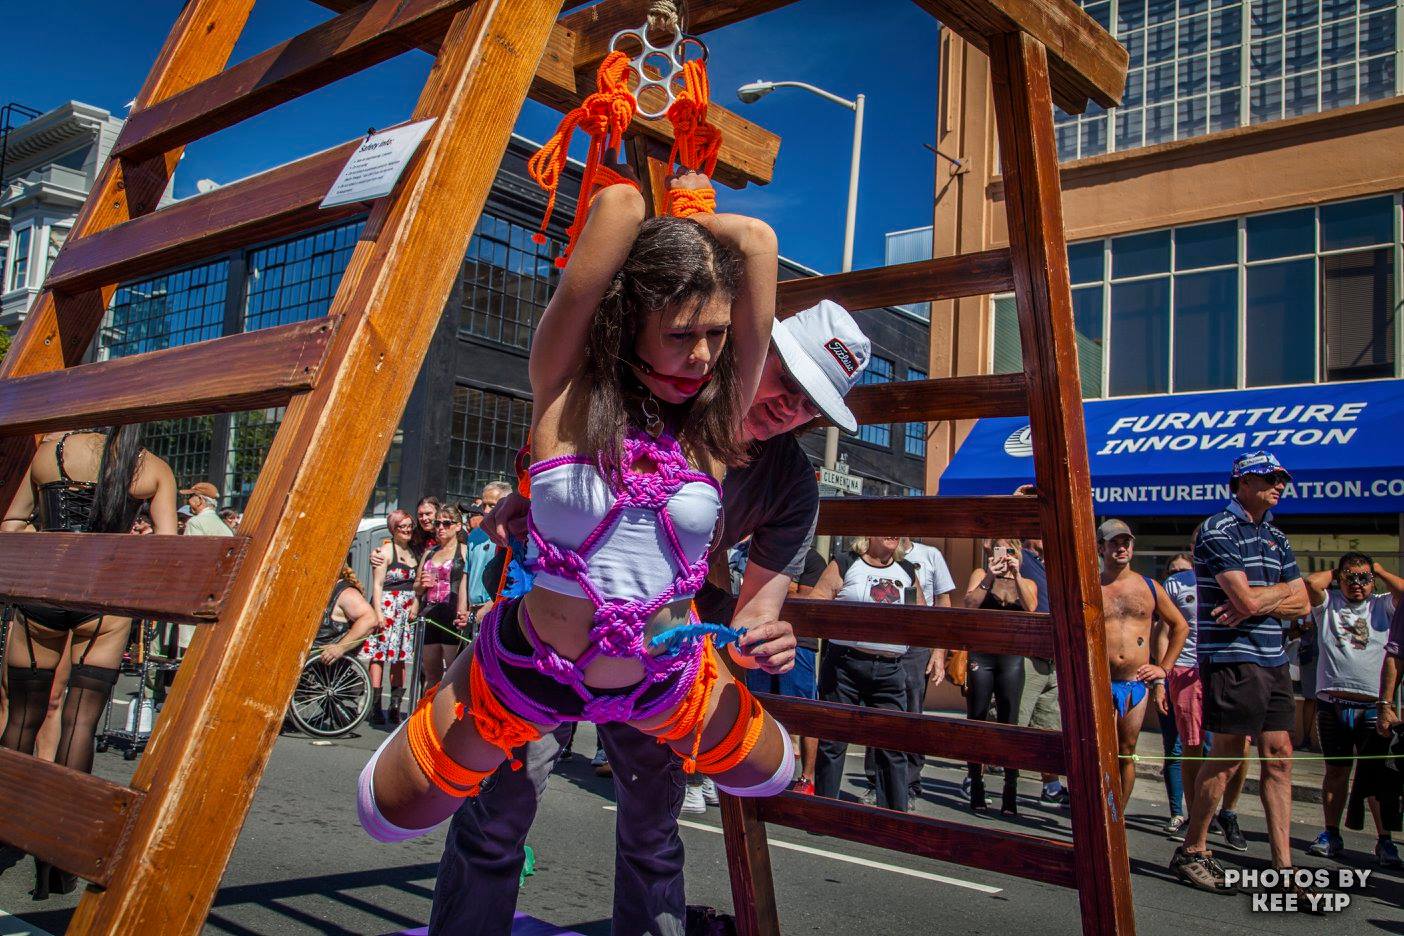 Everything You Need to Know Before Going to the Folsom Street Fair